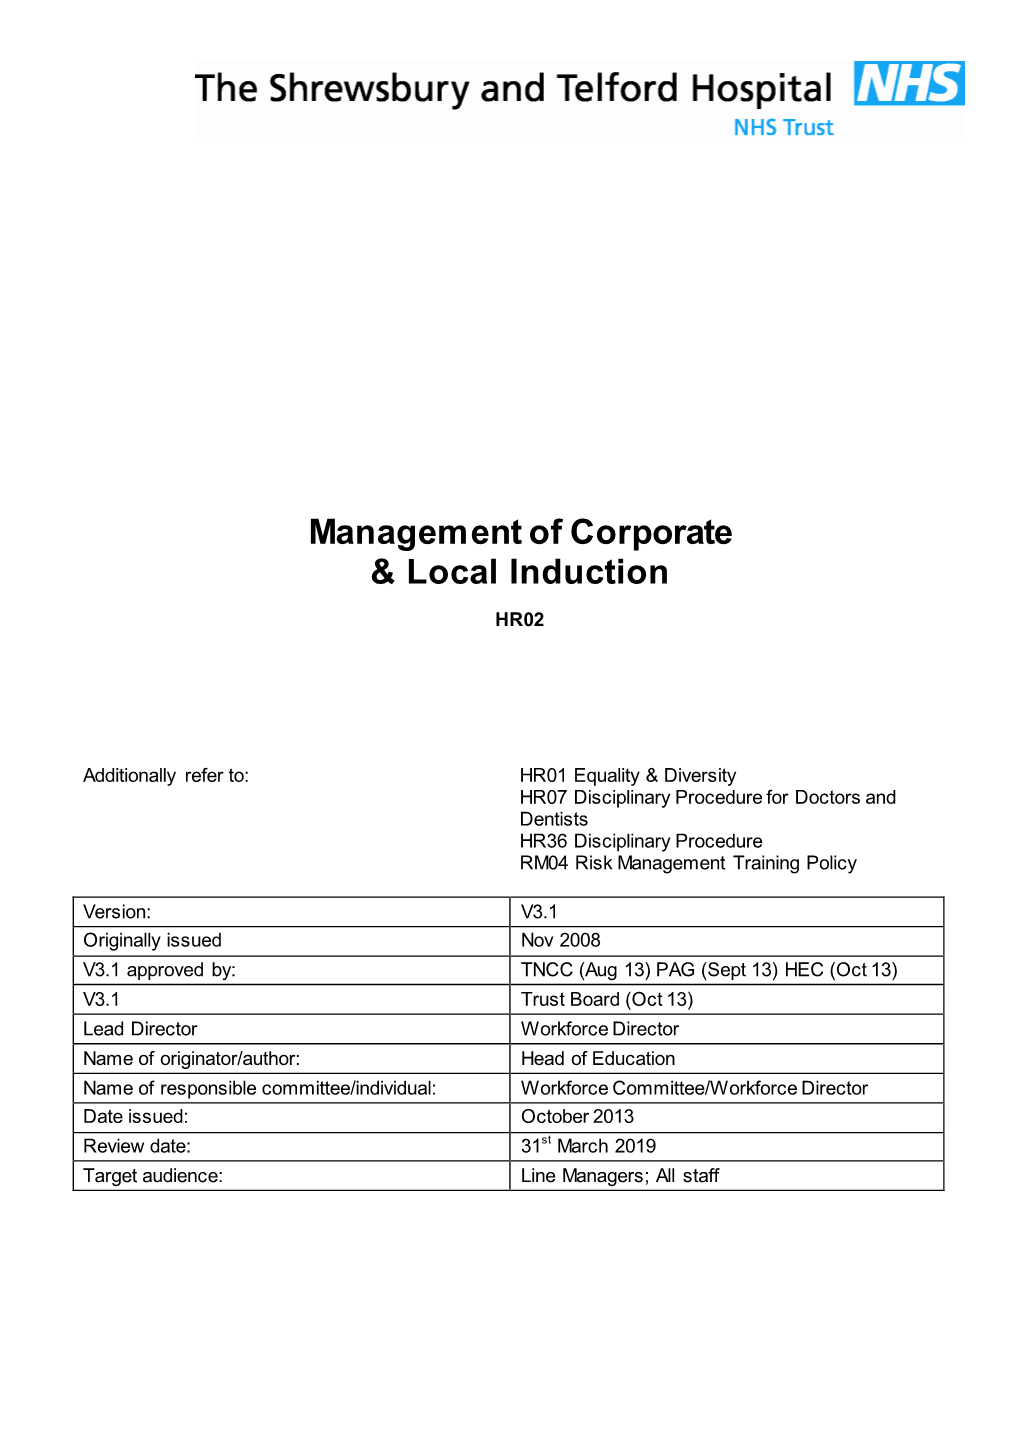 Management of Corporate and Local Induction – HR02